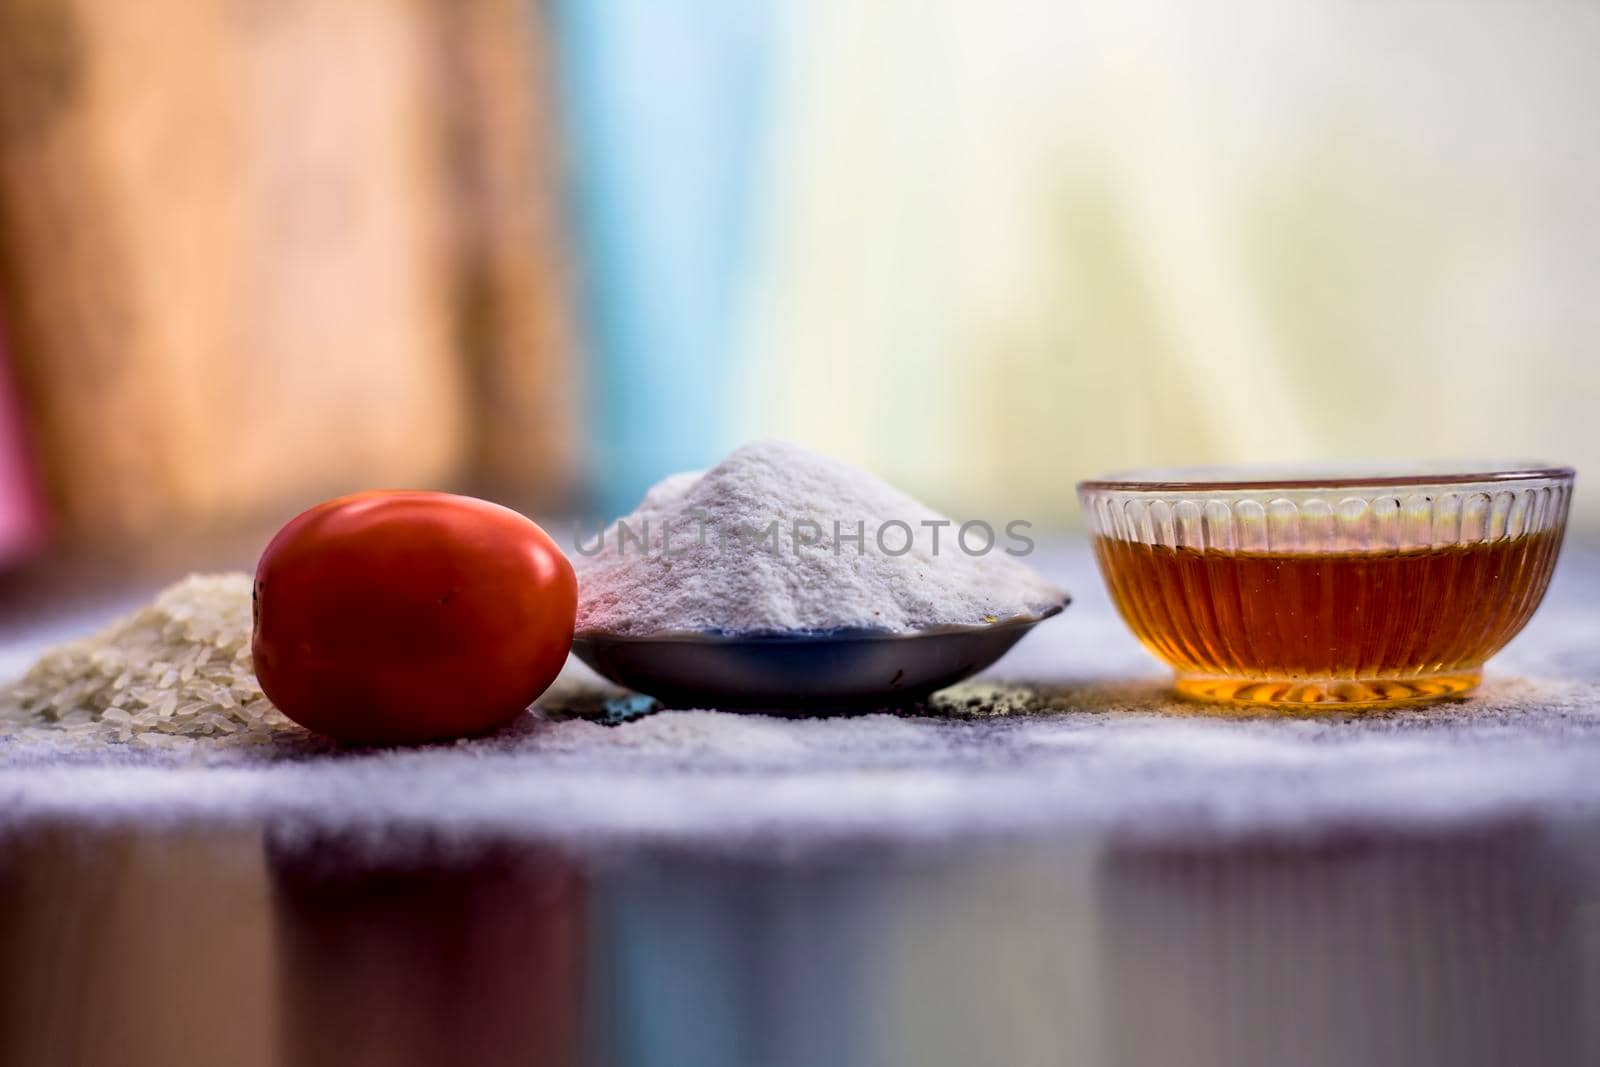 Face pack of rice flour and tomato in a glass bowl on wooden surface along with raw rice,tomato and rice flour.Used for the treatment of oily skin. by mirzamlk